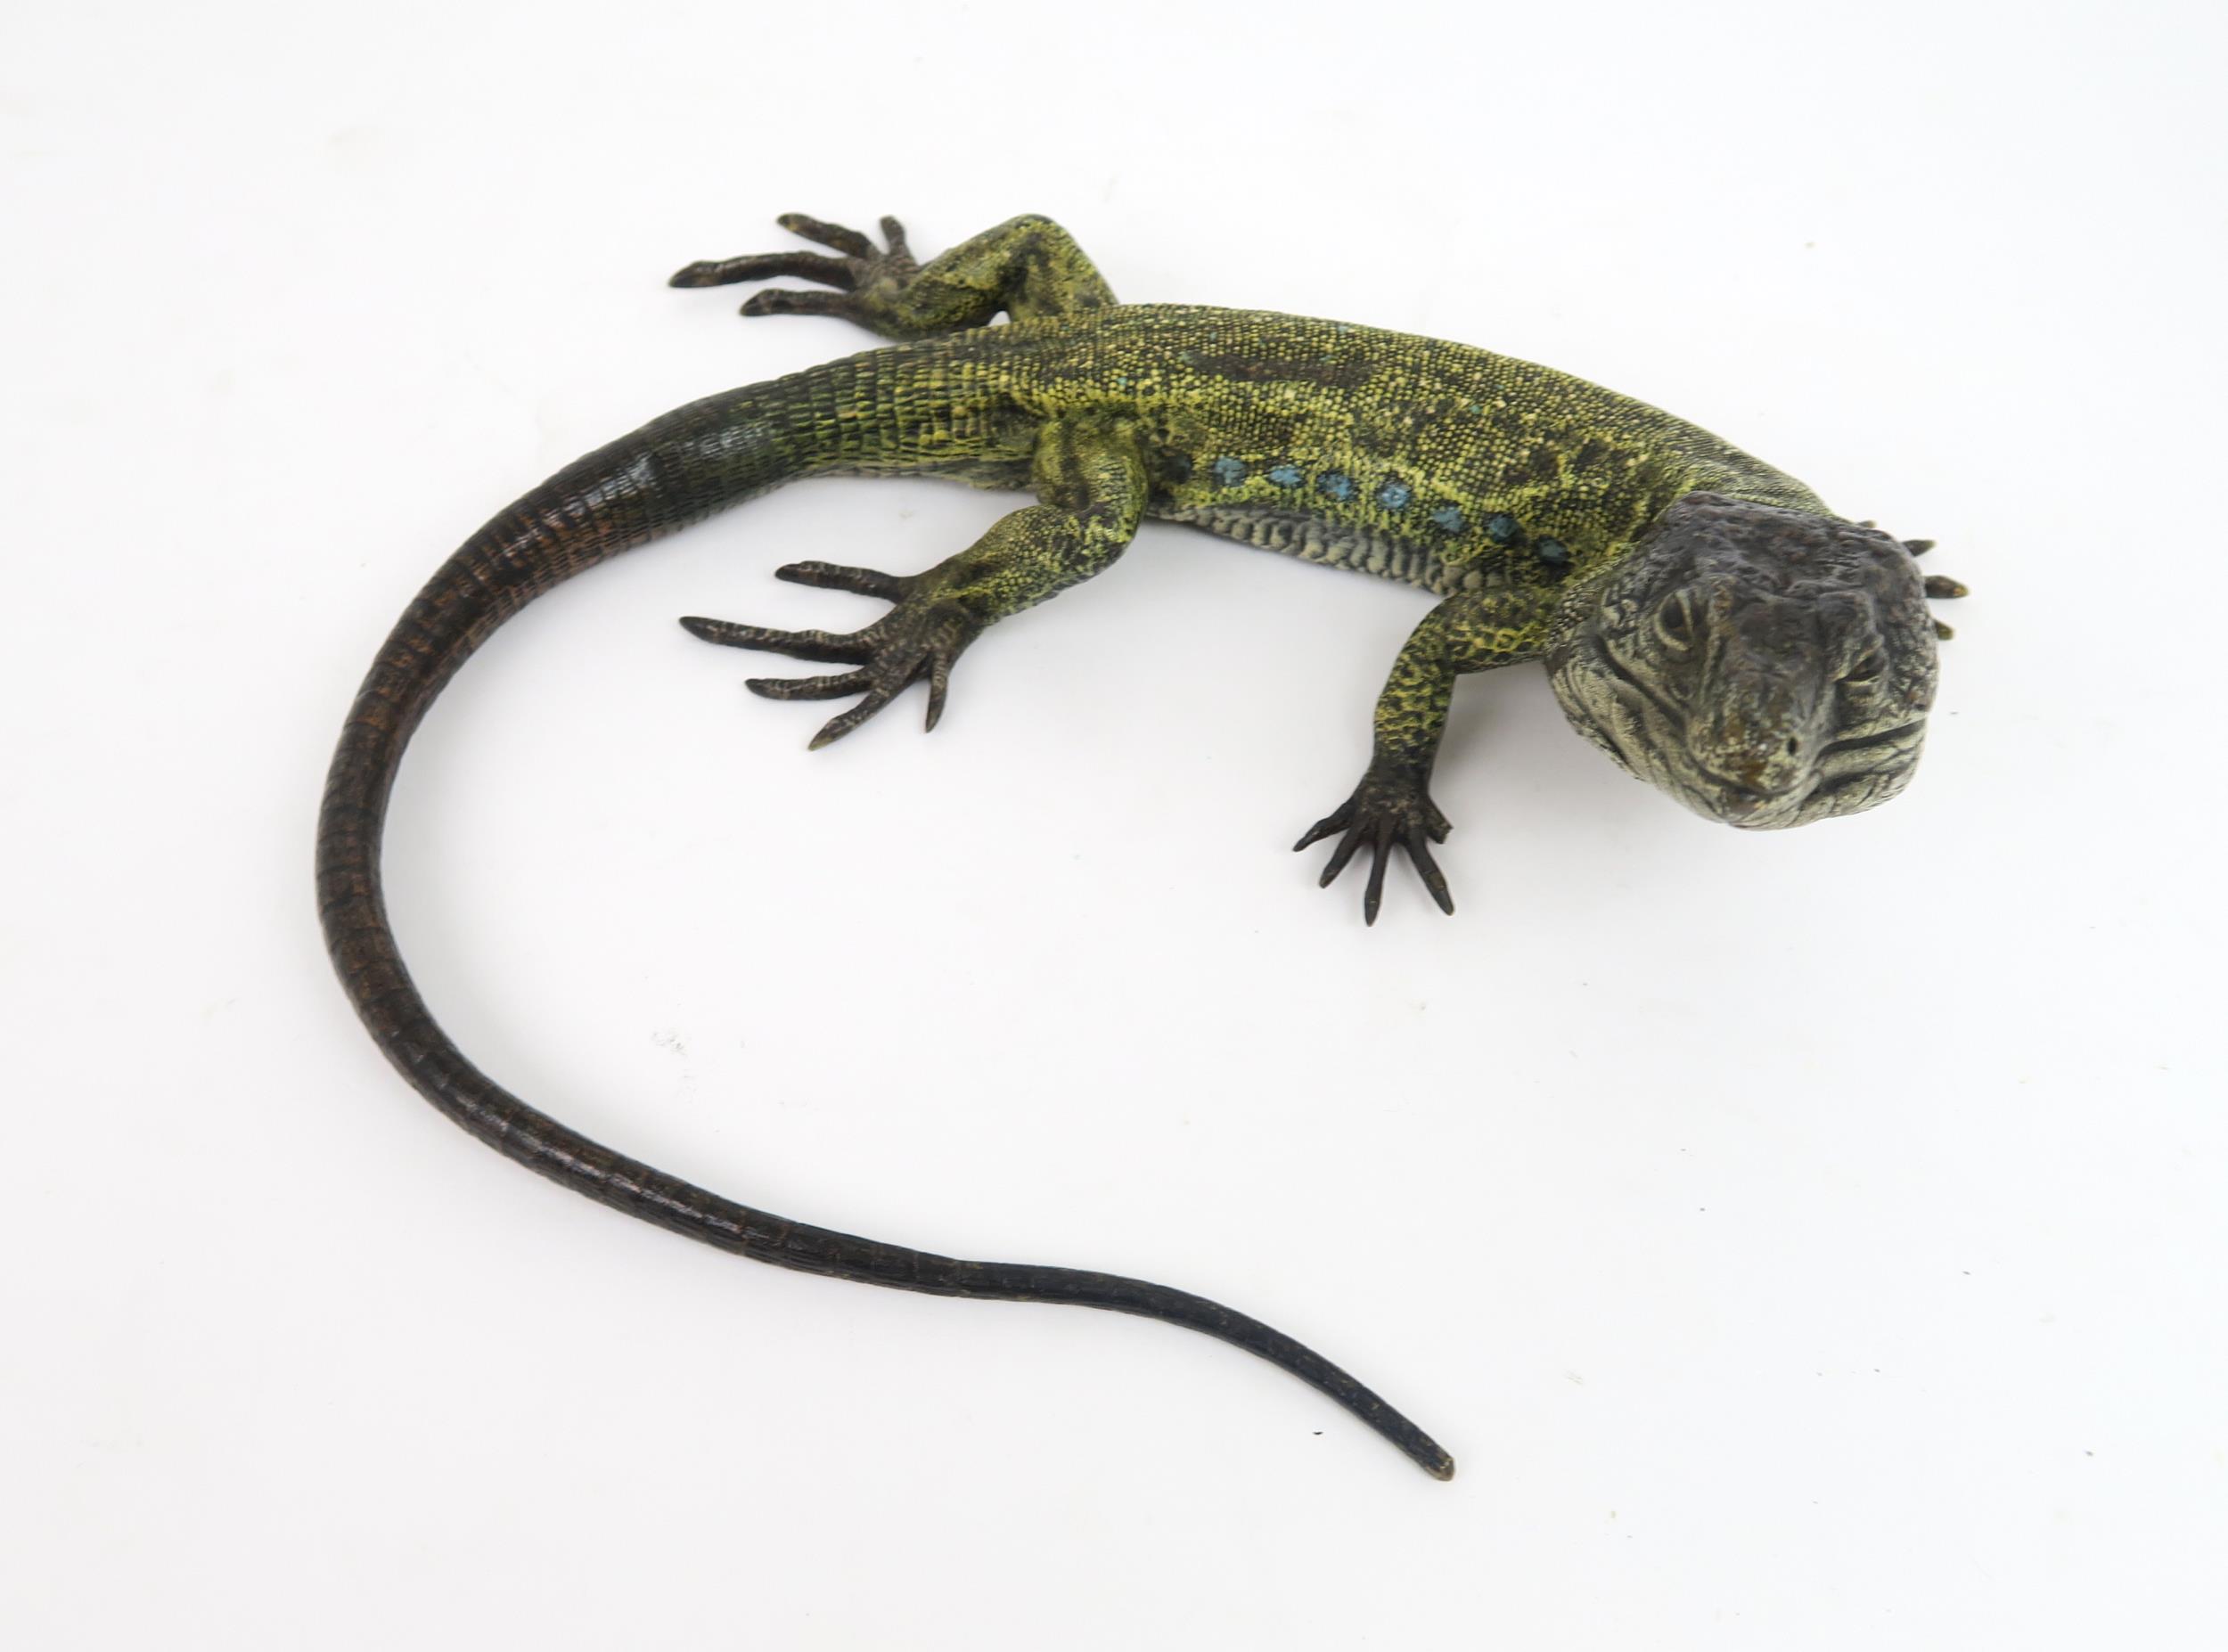 AN EARLY 20TH CENTURY FRANZ BERGMAN COLD PAINTED BRONZE MODEL OF A LIZARD naturalistically